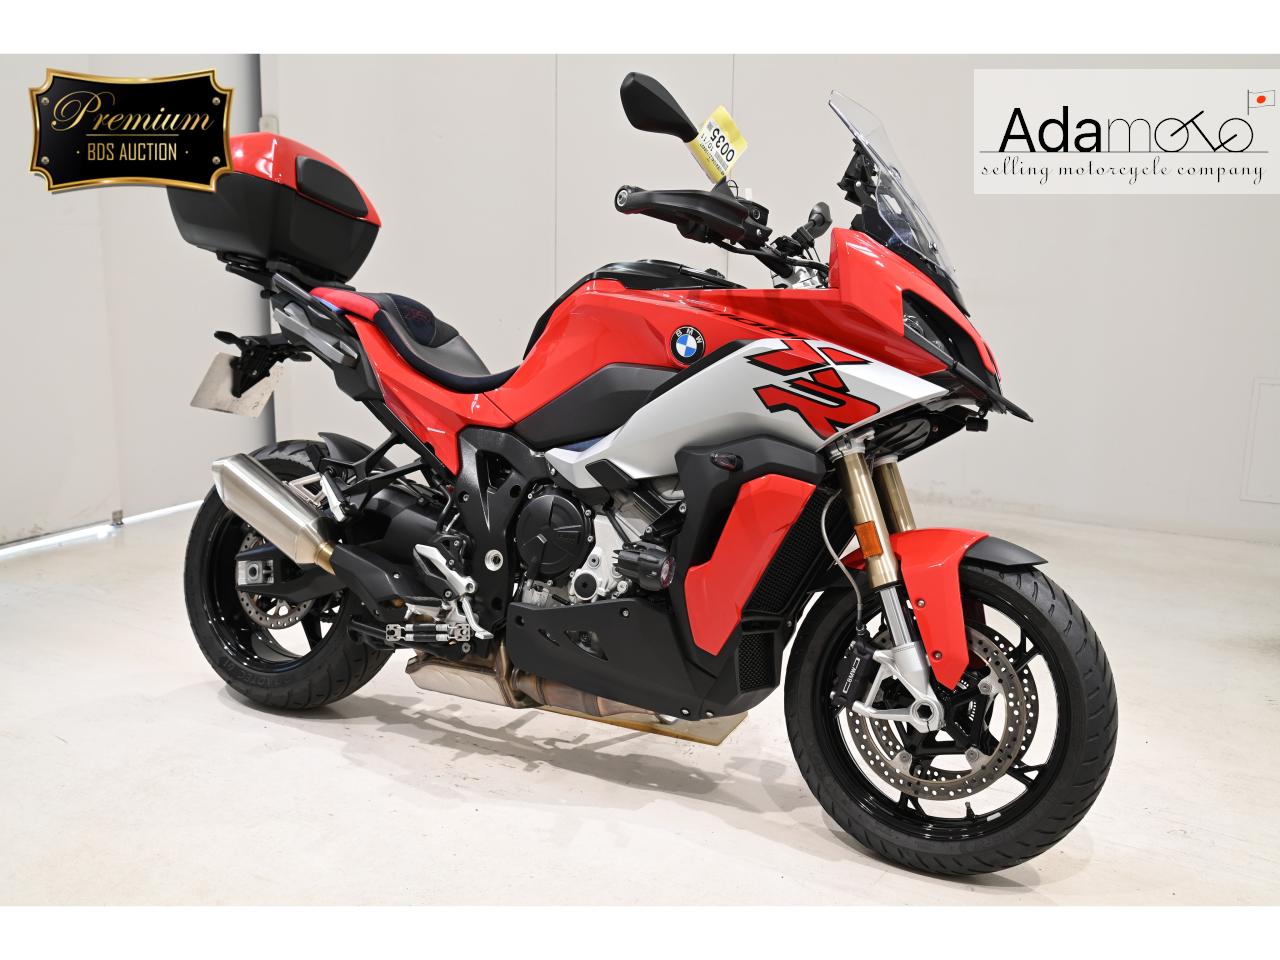 BMW S1000XR - Adamoto - Motorcycles from Japan